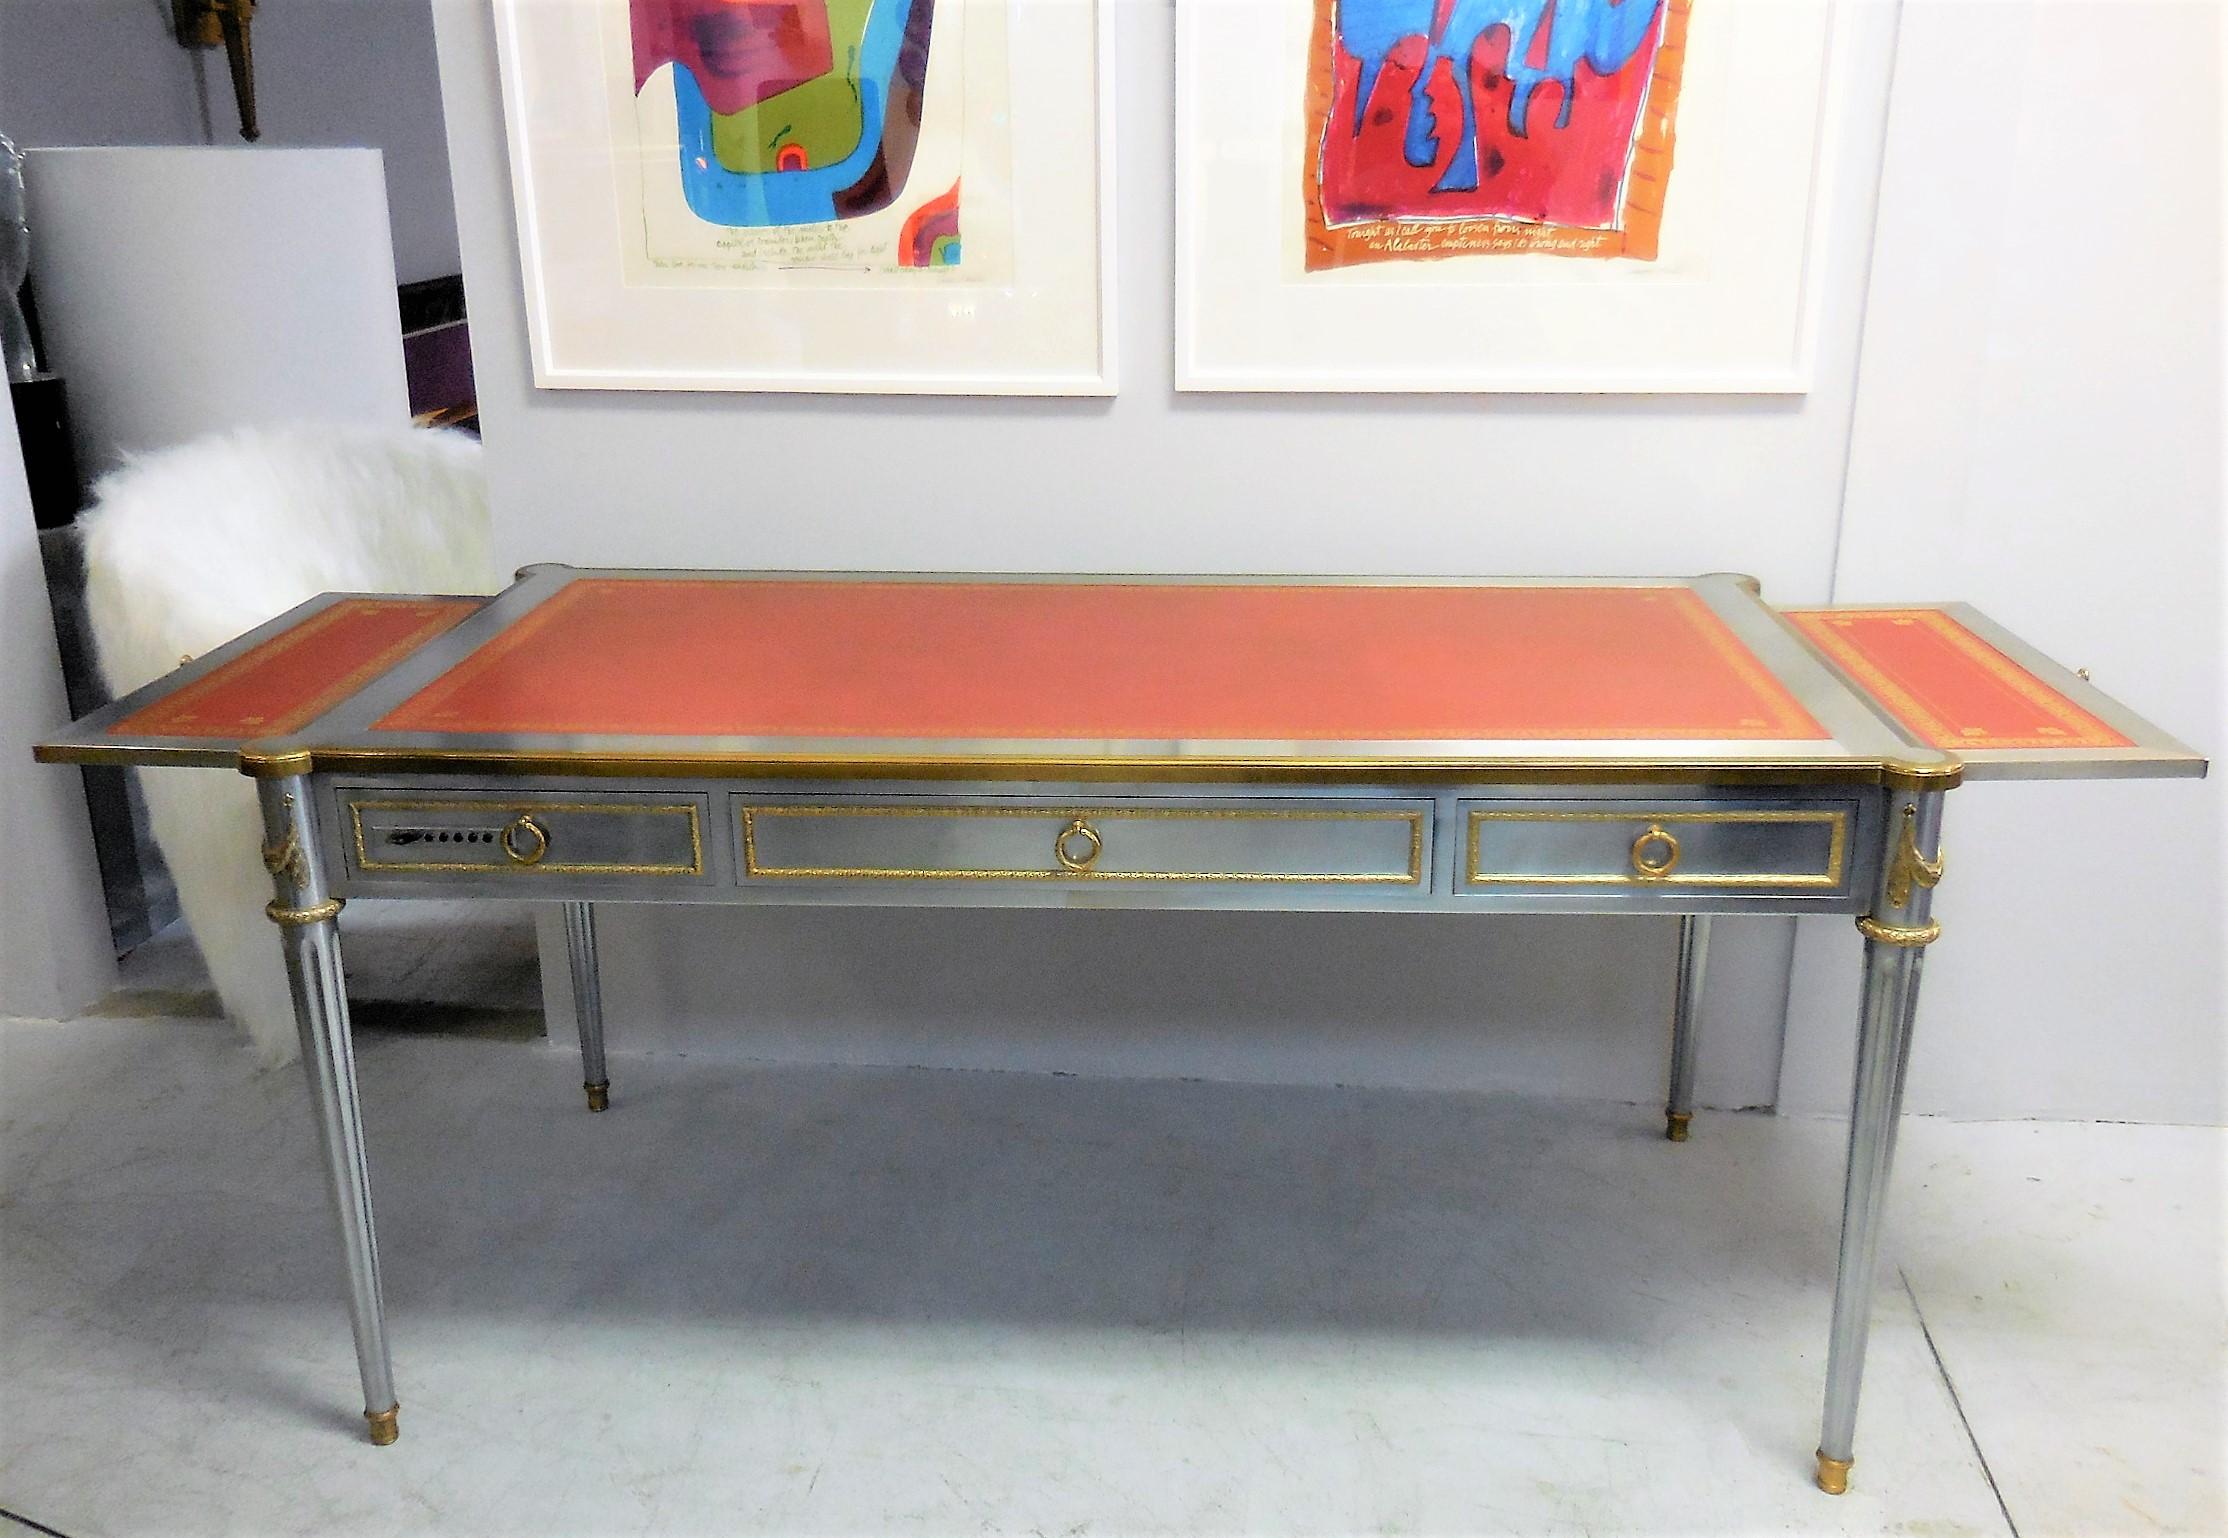 V-60 desk by John Vesey. A rare example of this very elusive desk. Solid stainless steel body with bronze doré mounts, hardware by P.E. Guerin and original gold embossed red leather top. The desk has three drawers lined in suede, including one with